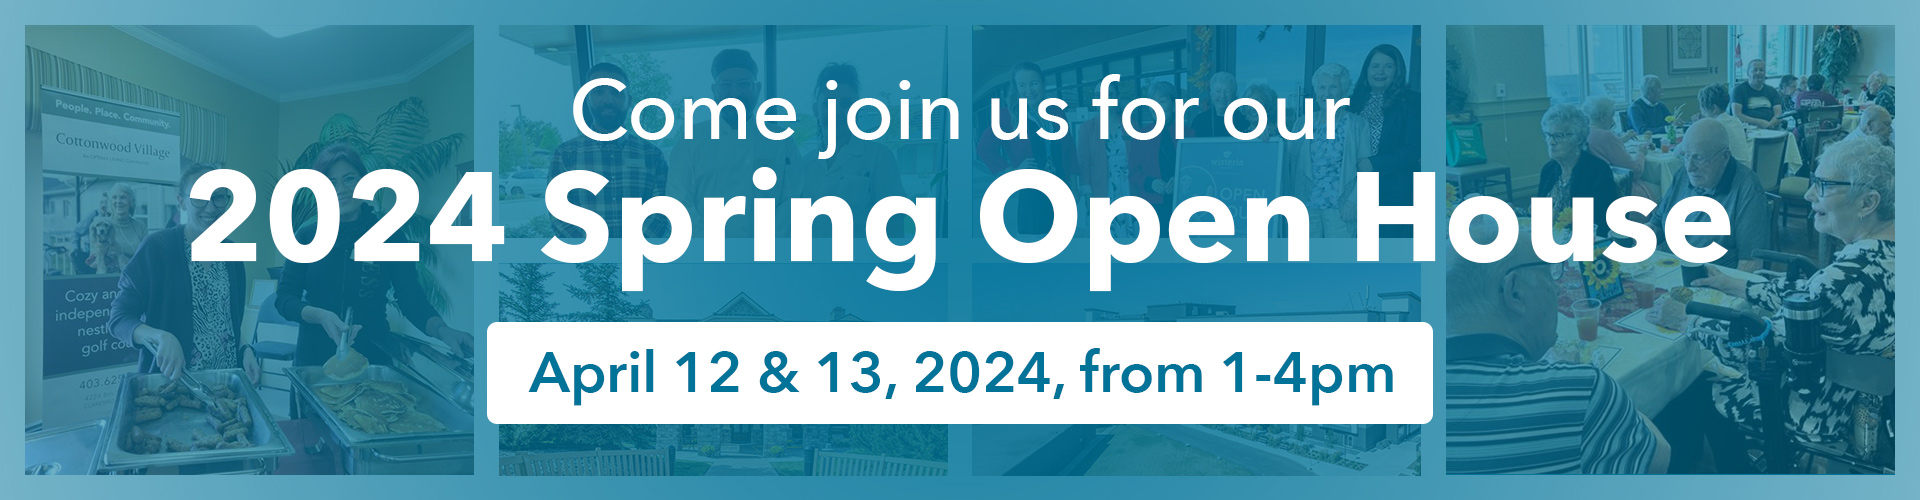 2024 Spring Open House announcement